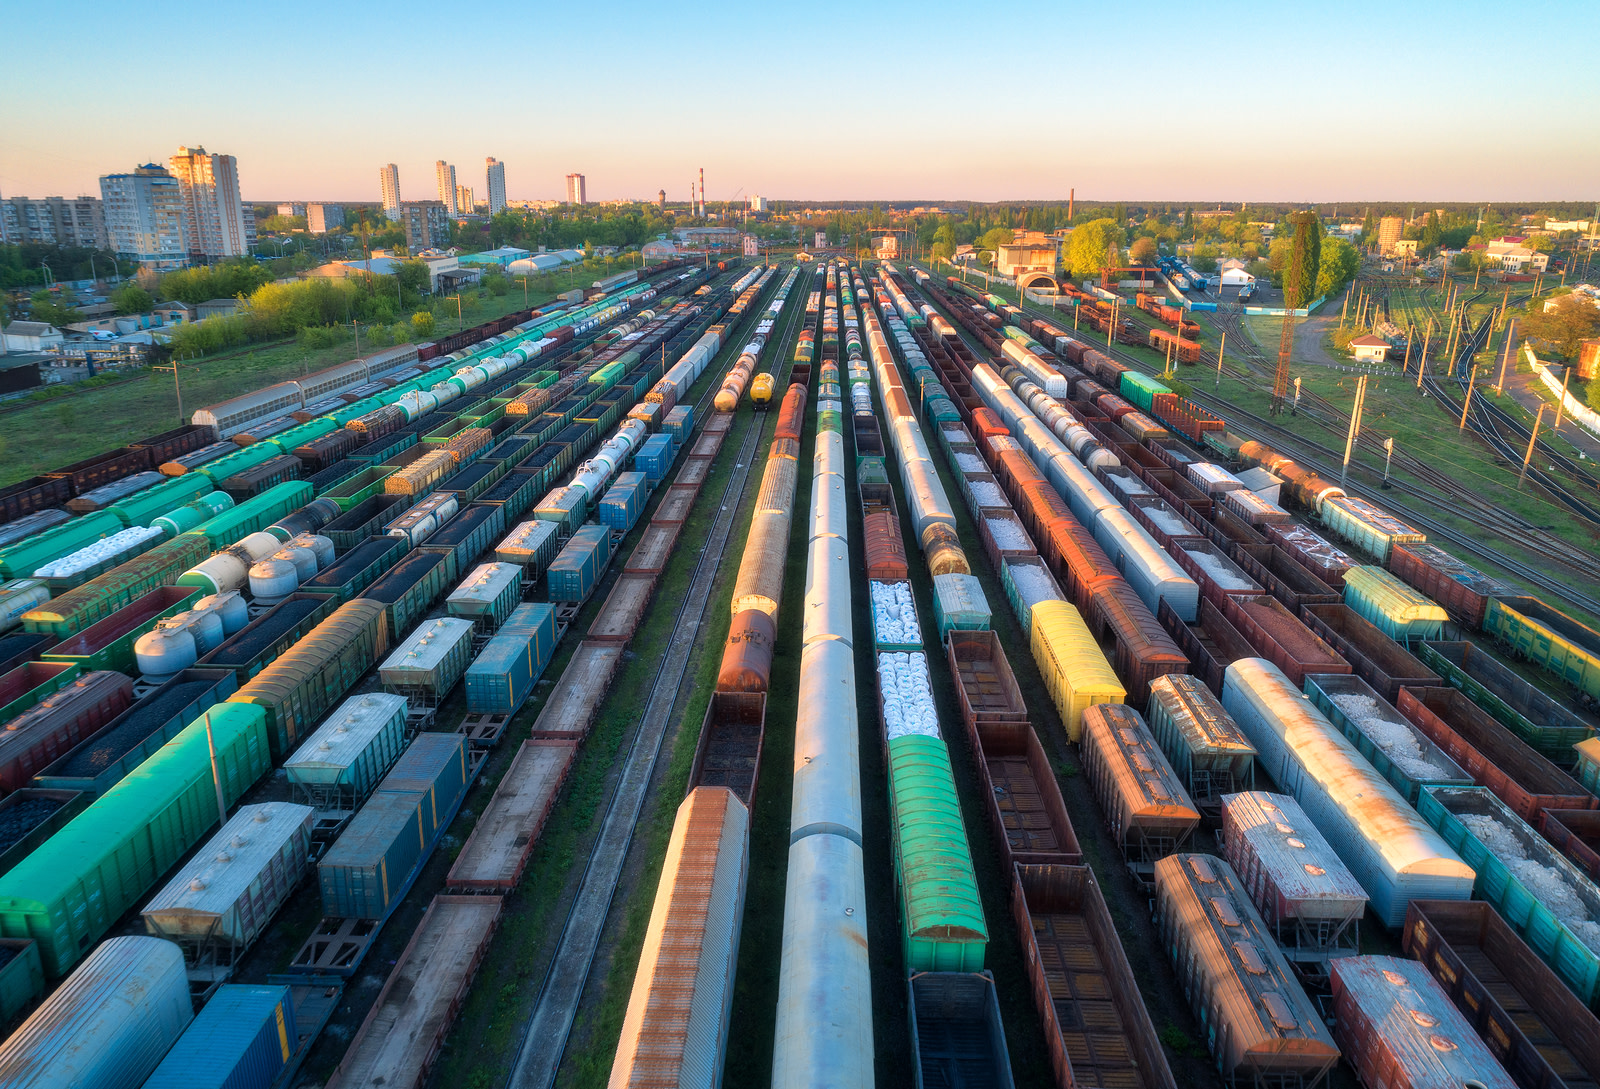 bigstock-aerial-view-of-freight-trains-282109090.jpg